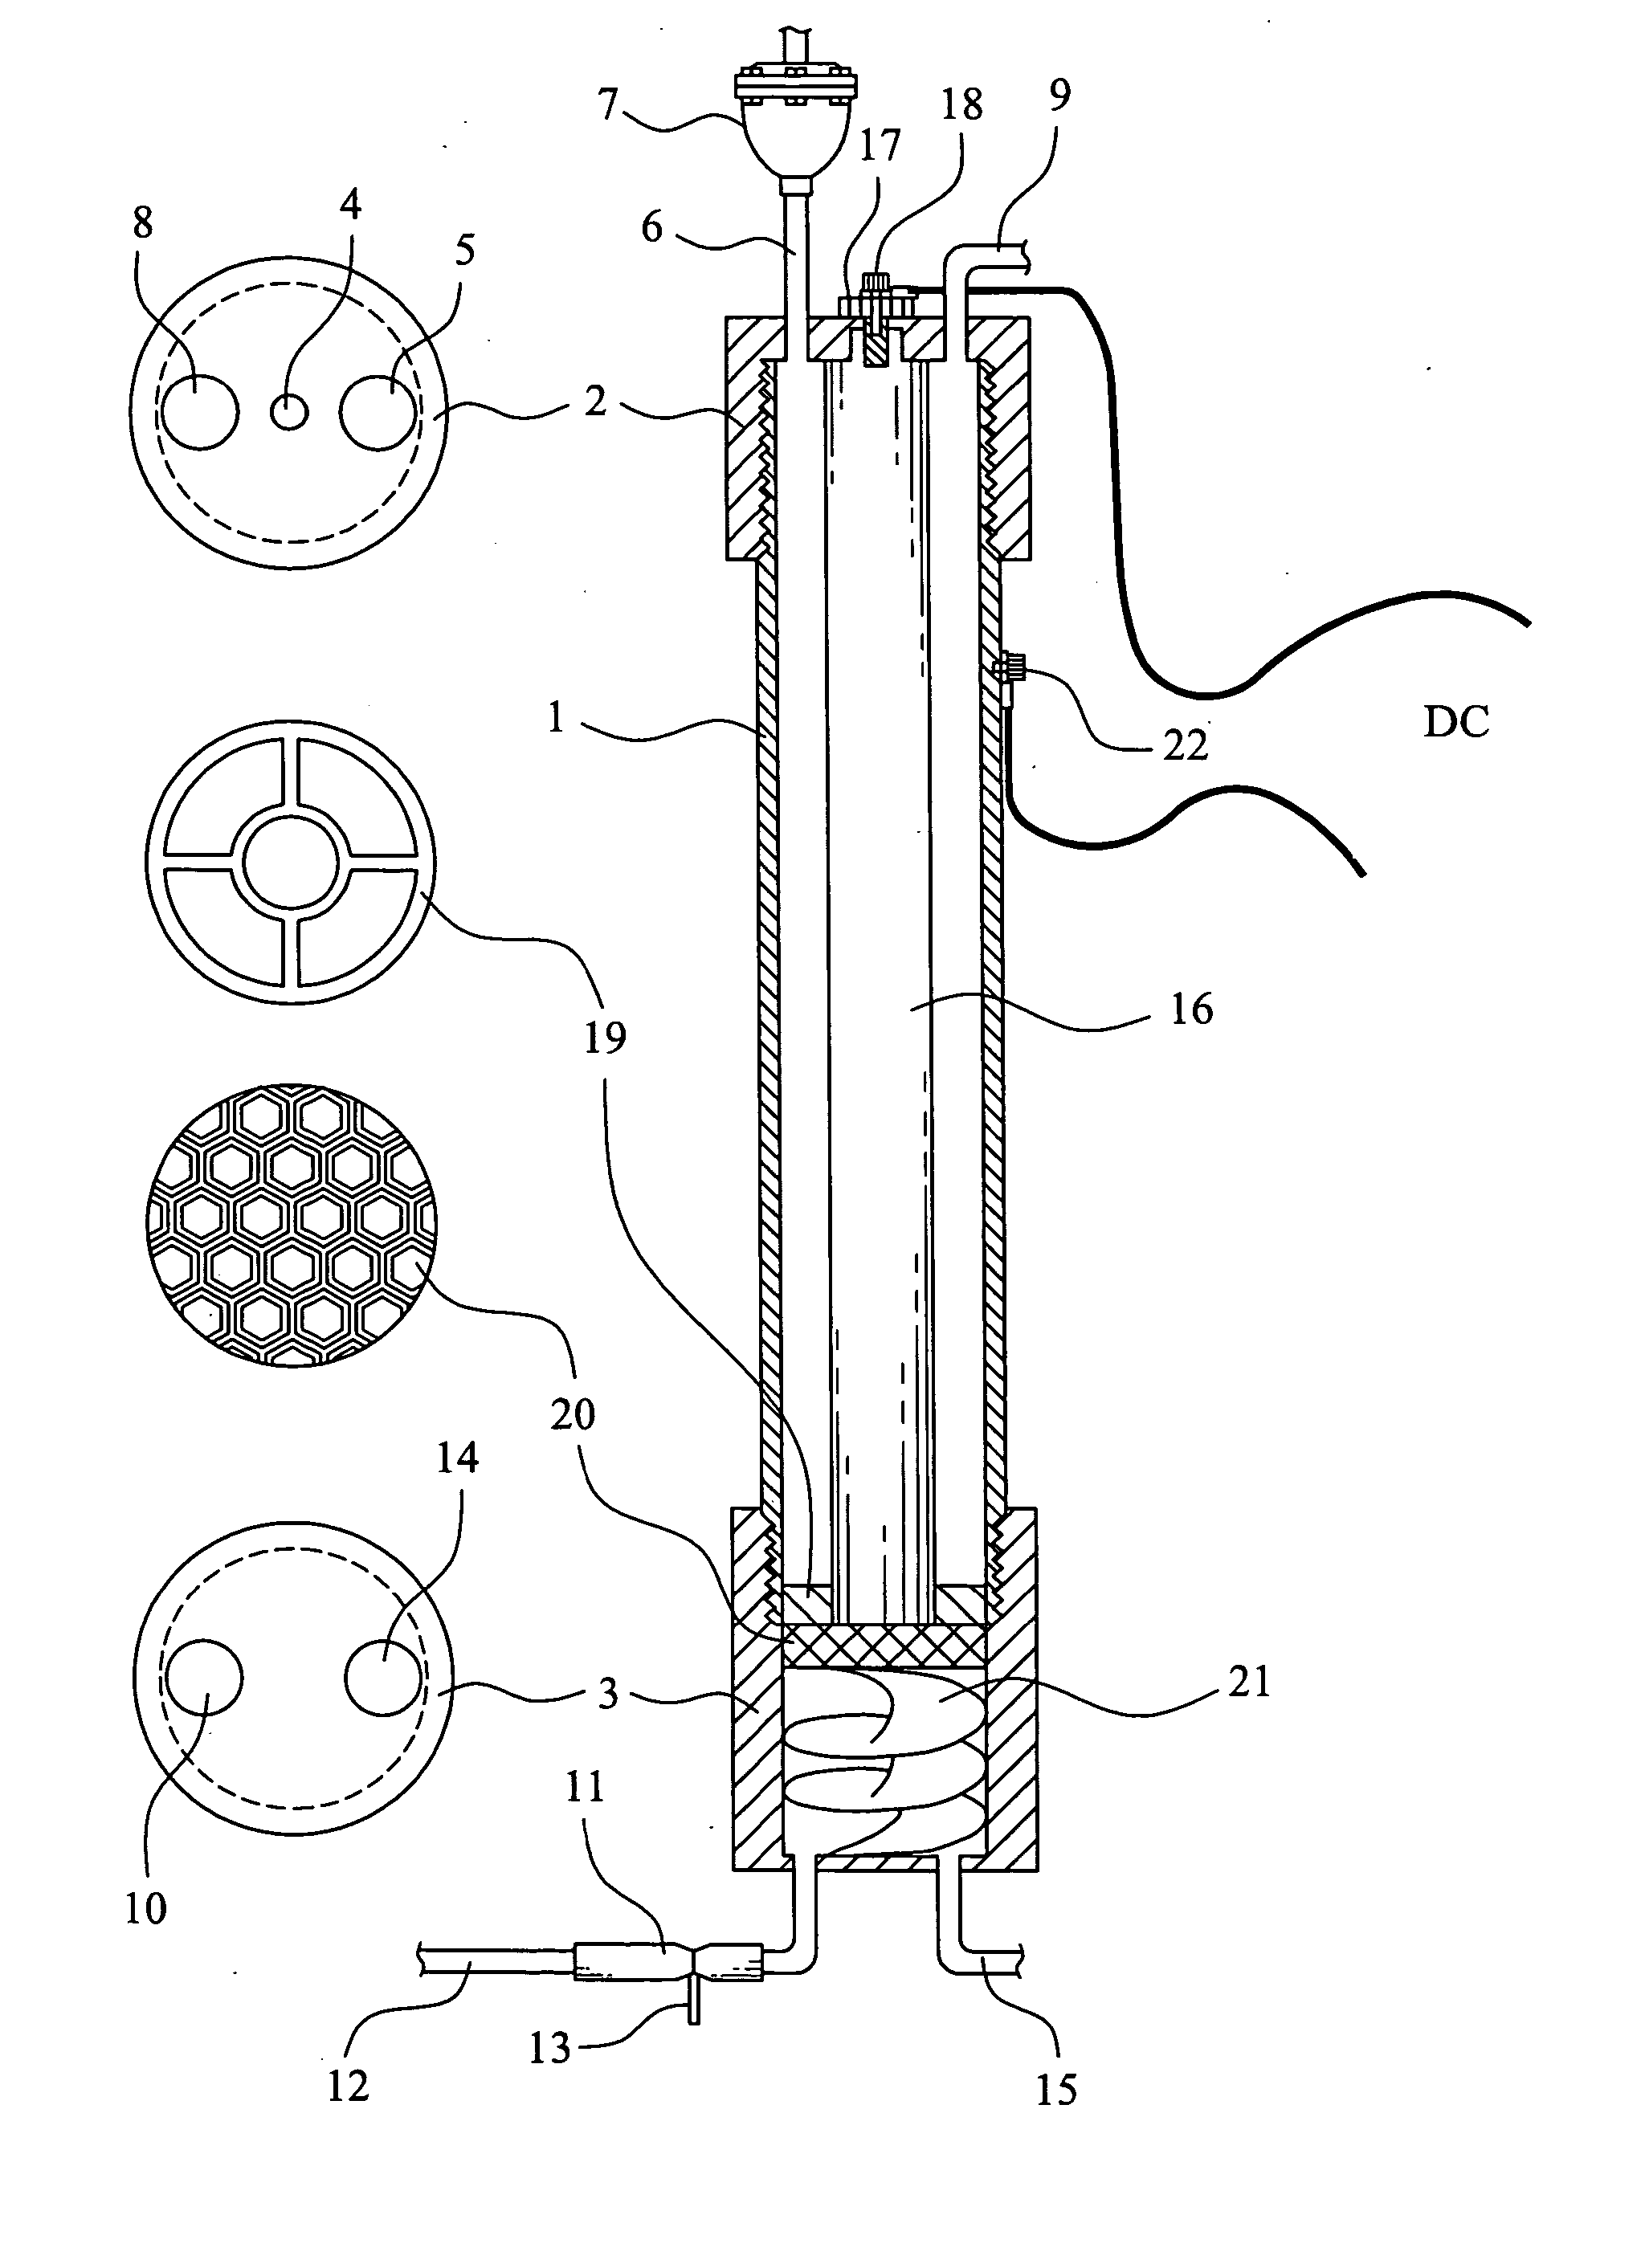 Water treatment reactor for simultaneous electrocoagulation and advanced oxidation processes